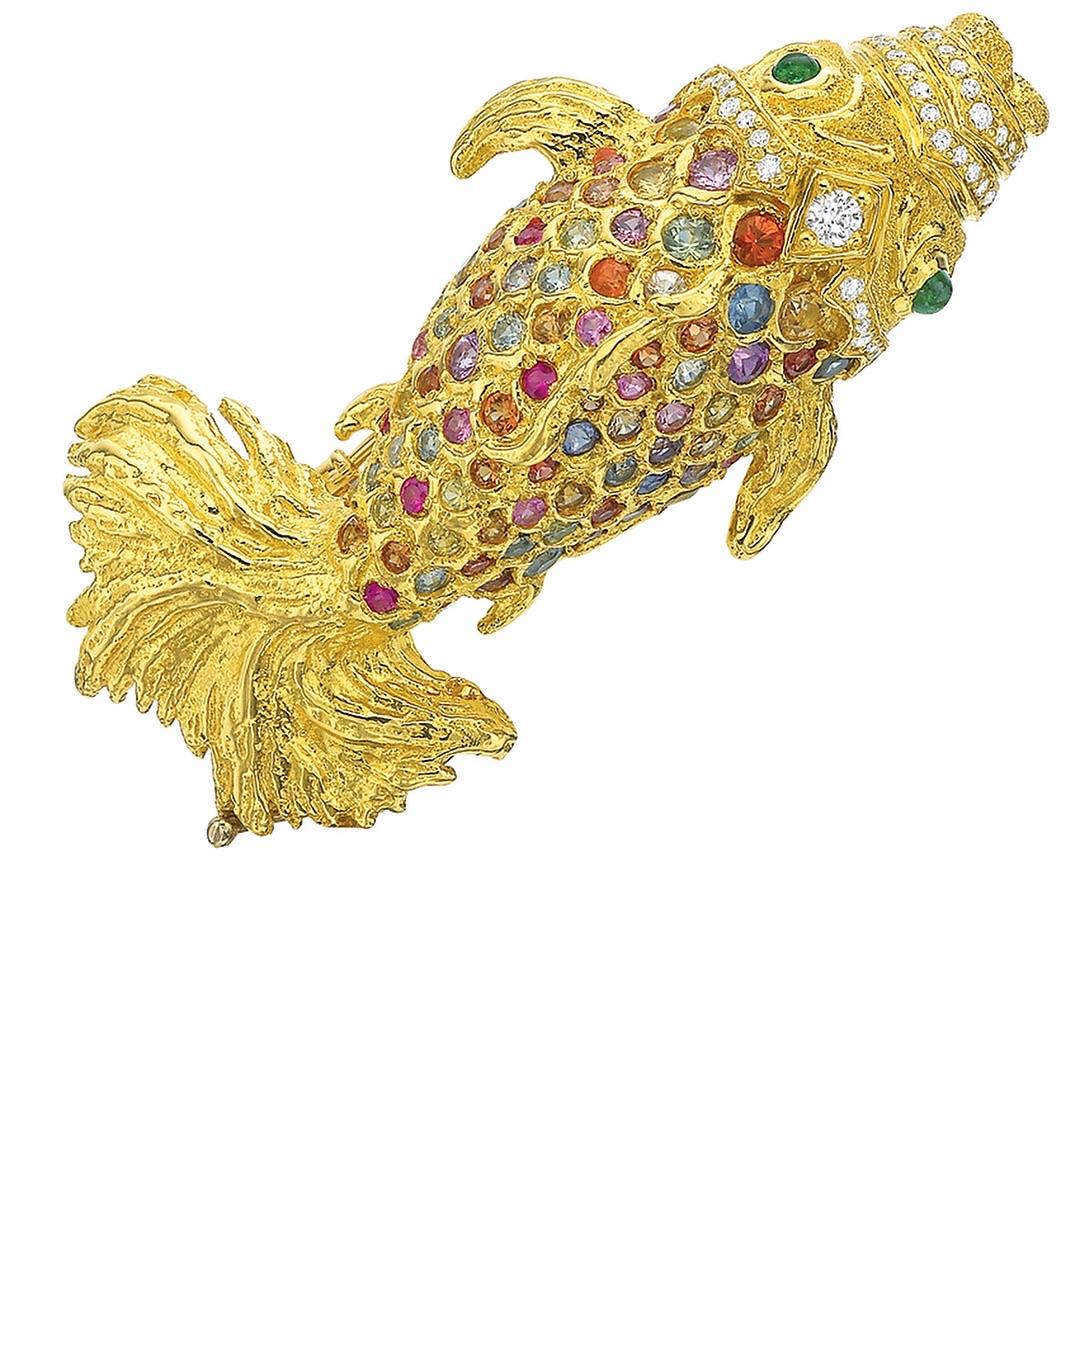 This Andrew Glassford Brooch is from his Premier Collection in 2017 and was inspired by a family piece of Jewelry worn for many years. The 18k Yellow gold brooch is a fish whose scales are comprised of 2.45 carats of Multi-Colored Fancy Sapphires.